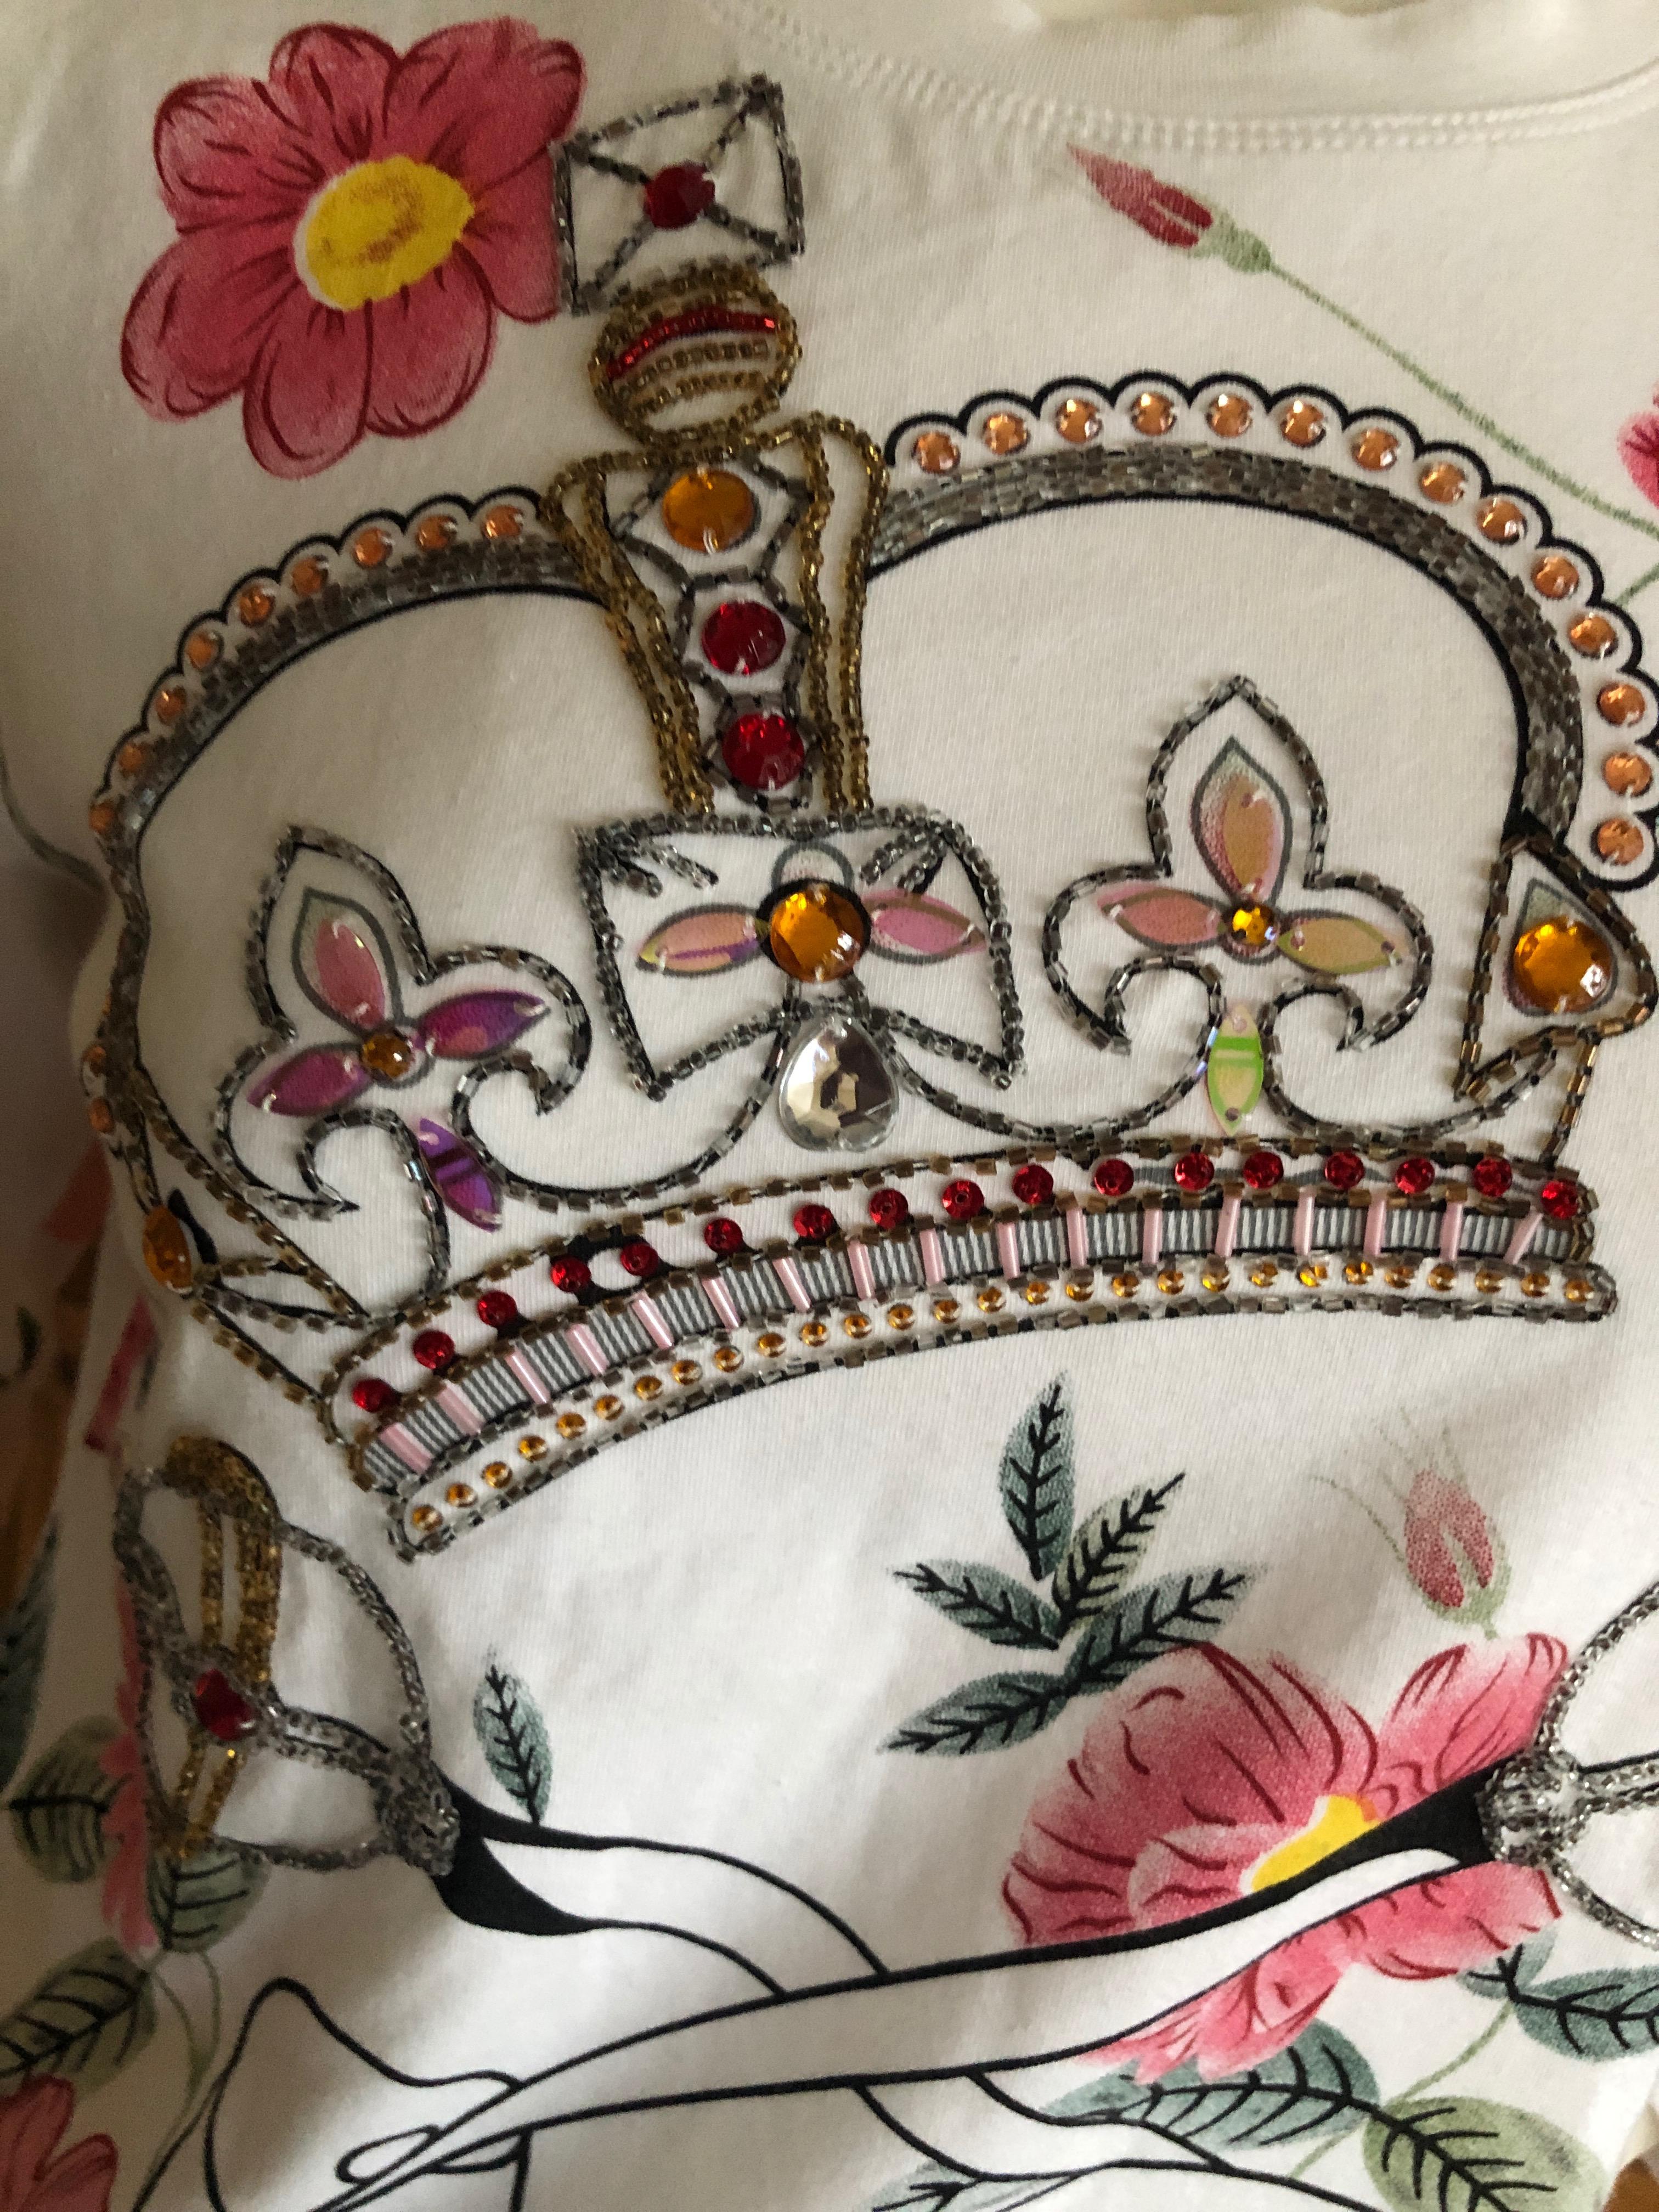 Christian Dior by John Galliano Long Sleeve Embellished Crown Scepter Cotton Top
Size 40 , M (size tag missing)
Bust 36